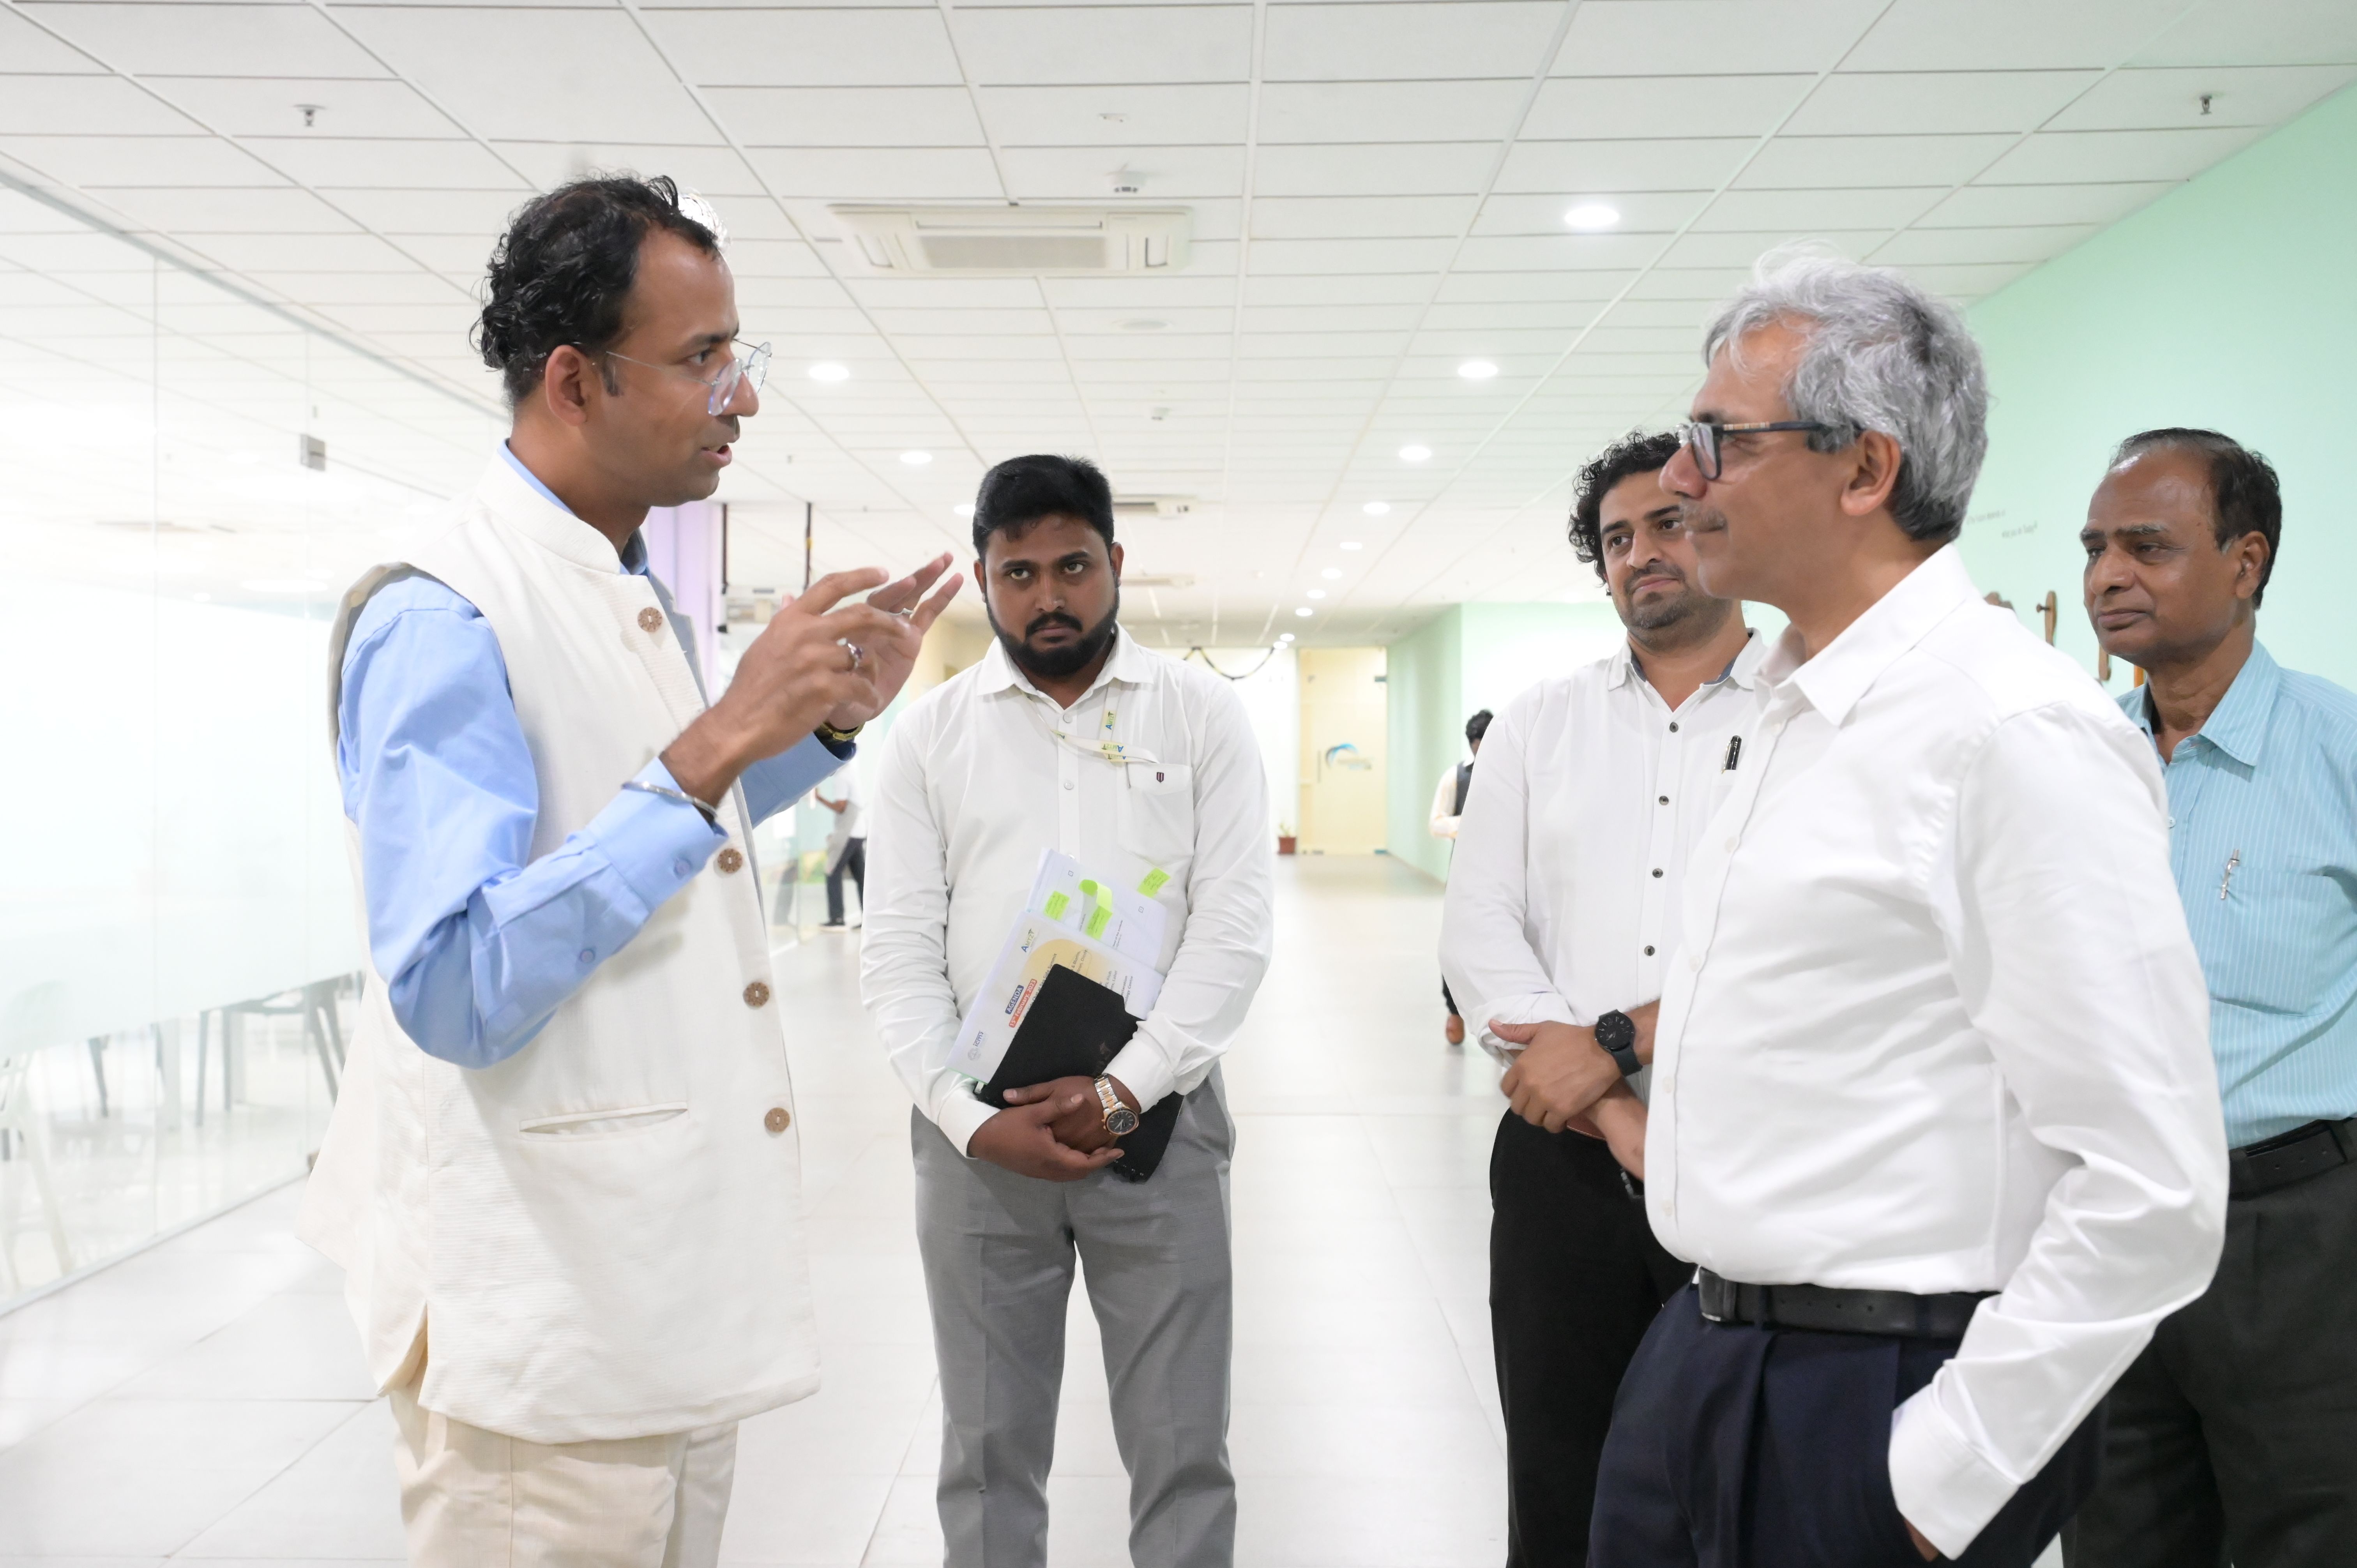 Dr. Jitendra Sharma meets Dr. Rajiv Bahl, DG of ICMR, at the Advanced Technology campus at AMTZ to discuss Health Care and Medical Care in India